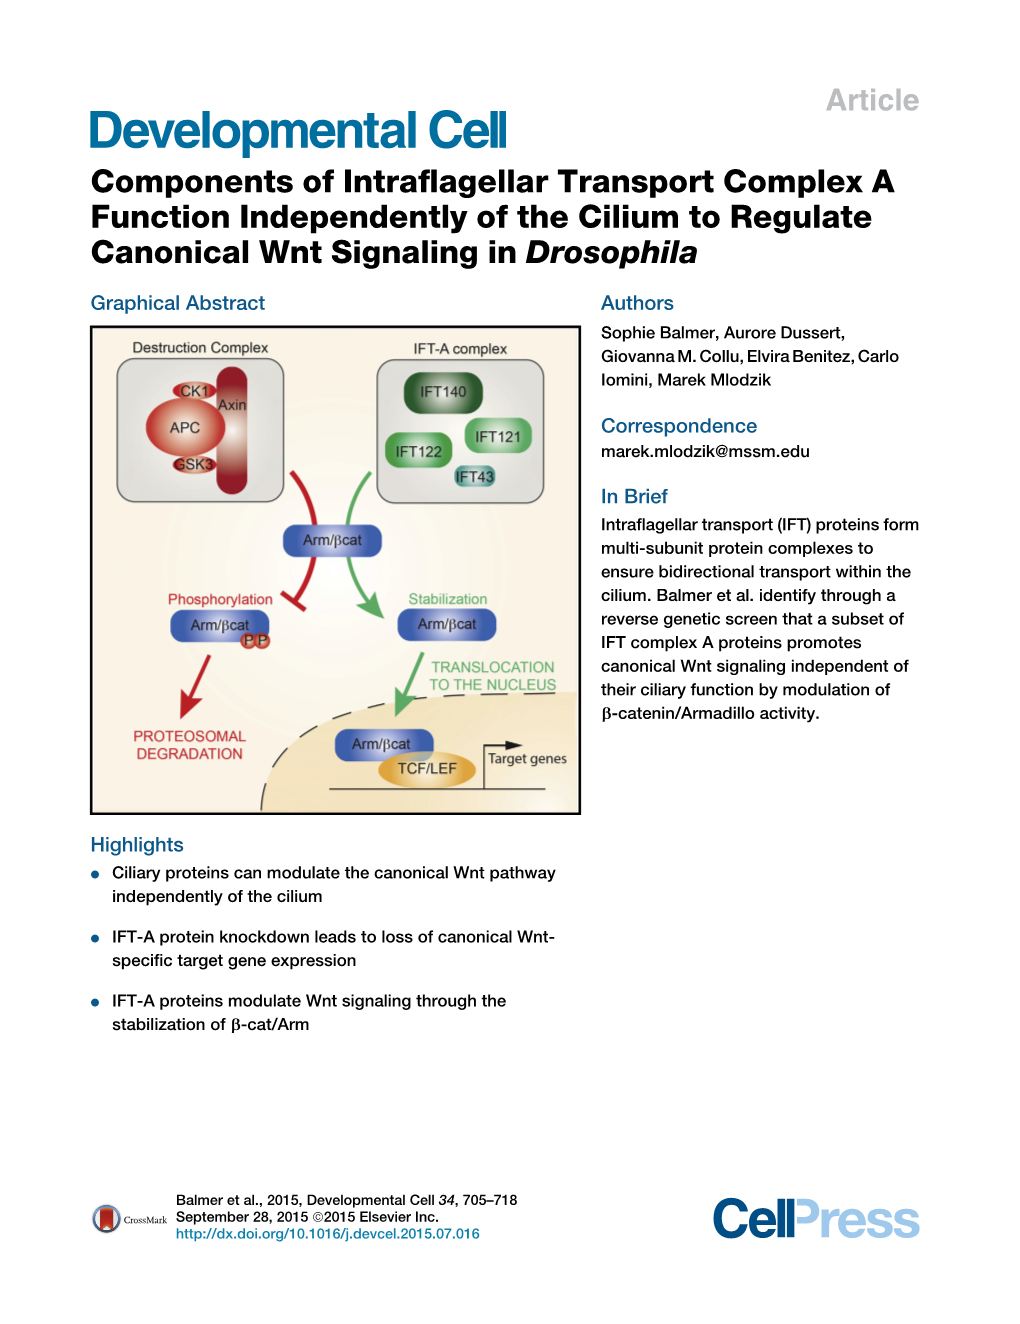 Components of Intraflagellar Transport Complex a Function